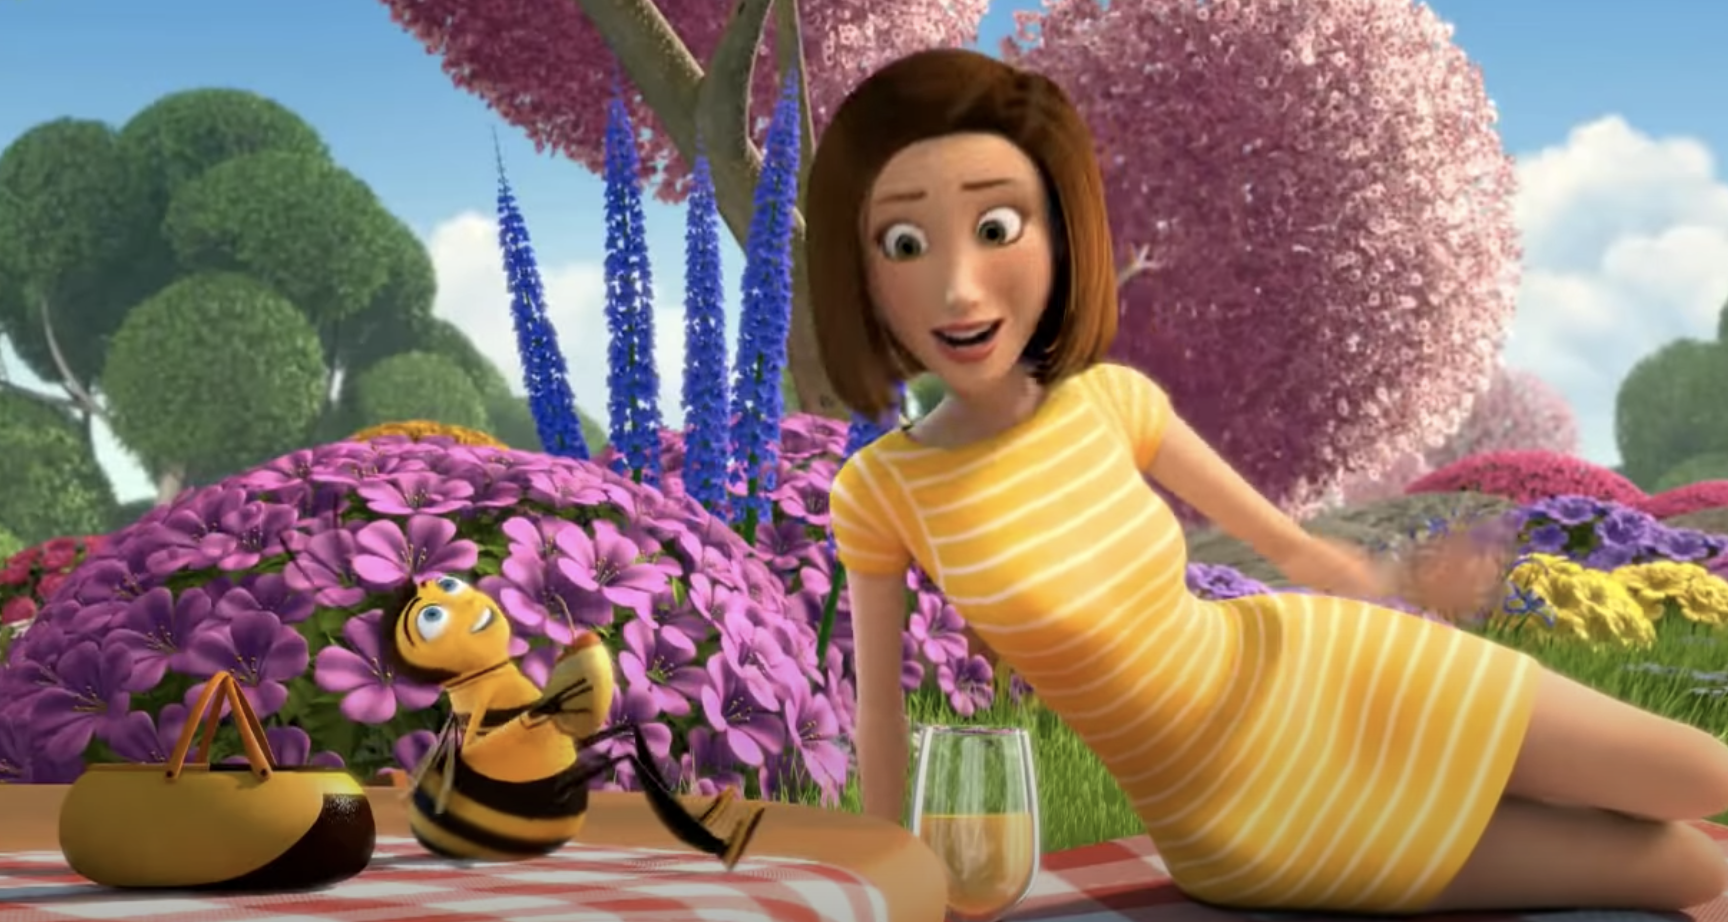 The bee and the lady having a picnic